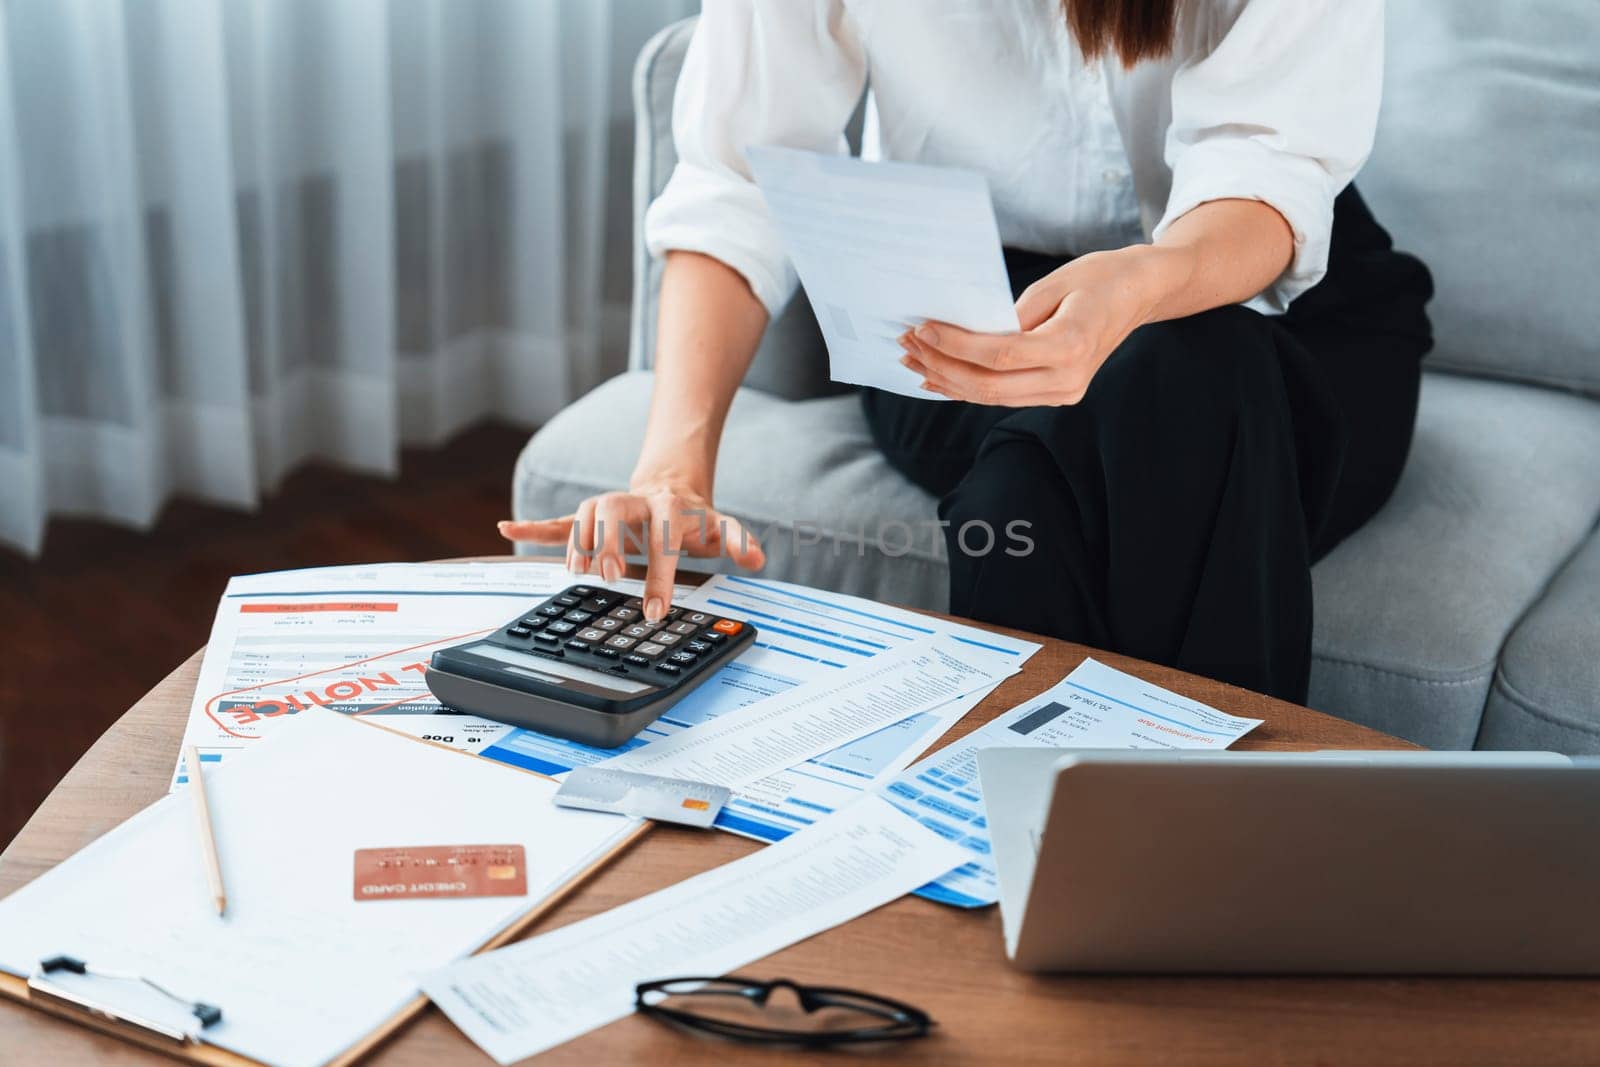 Stressed young woman has financial problems credit card debt to pay utmost by biancoblue